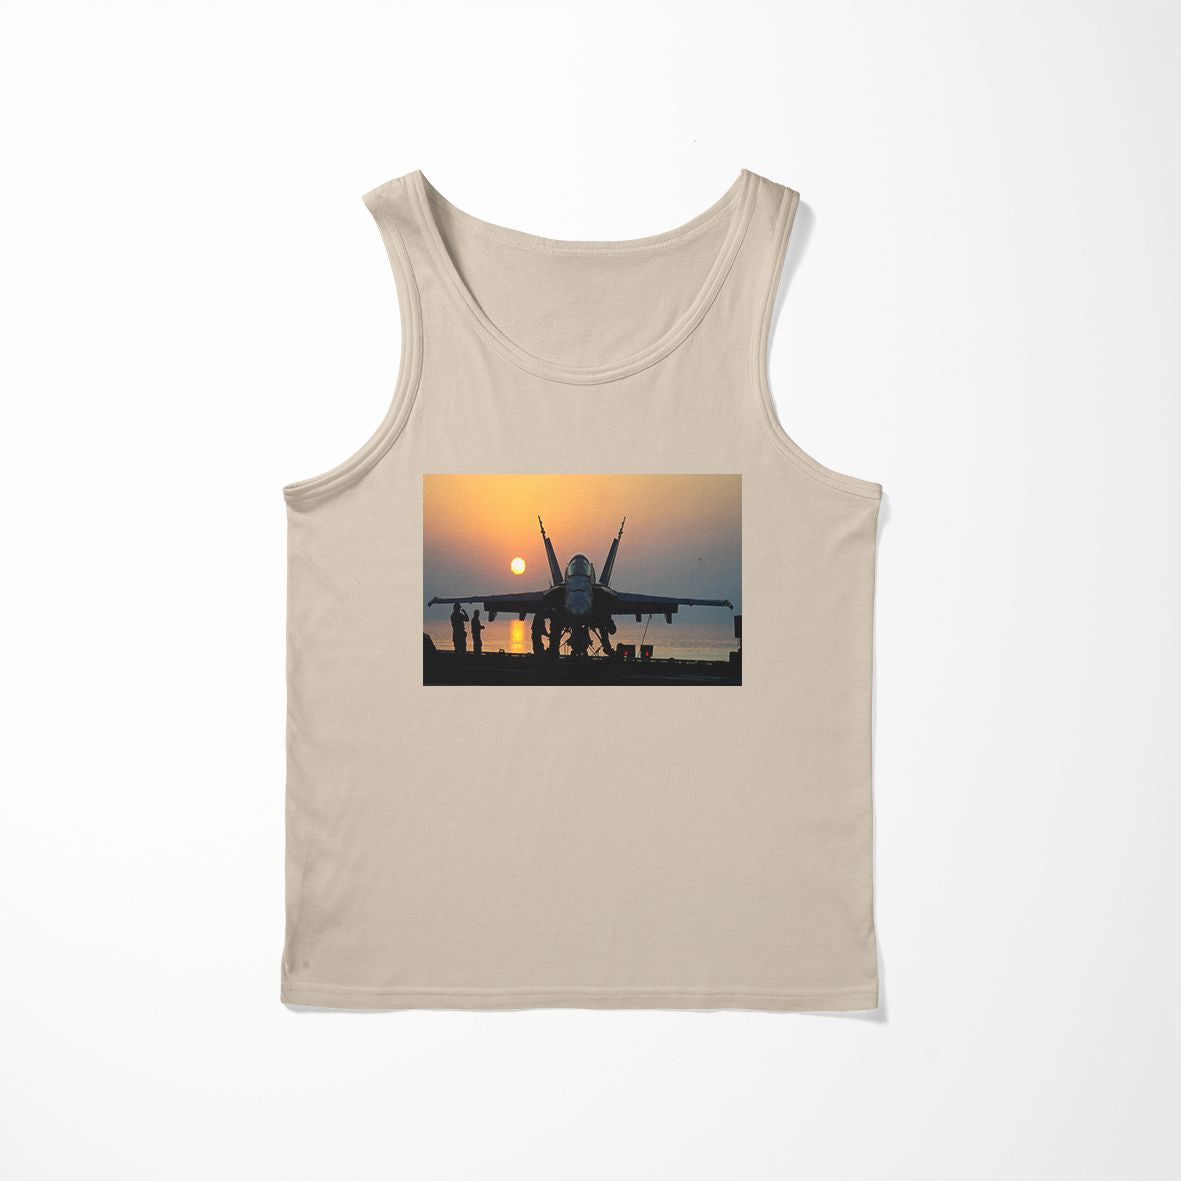 Military Jet During Sunset Designed Tank Tops